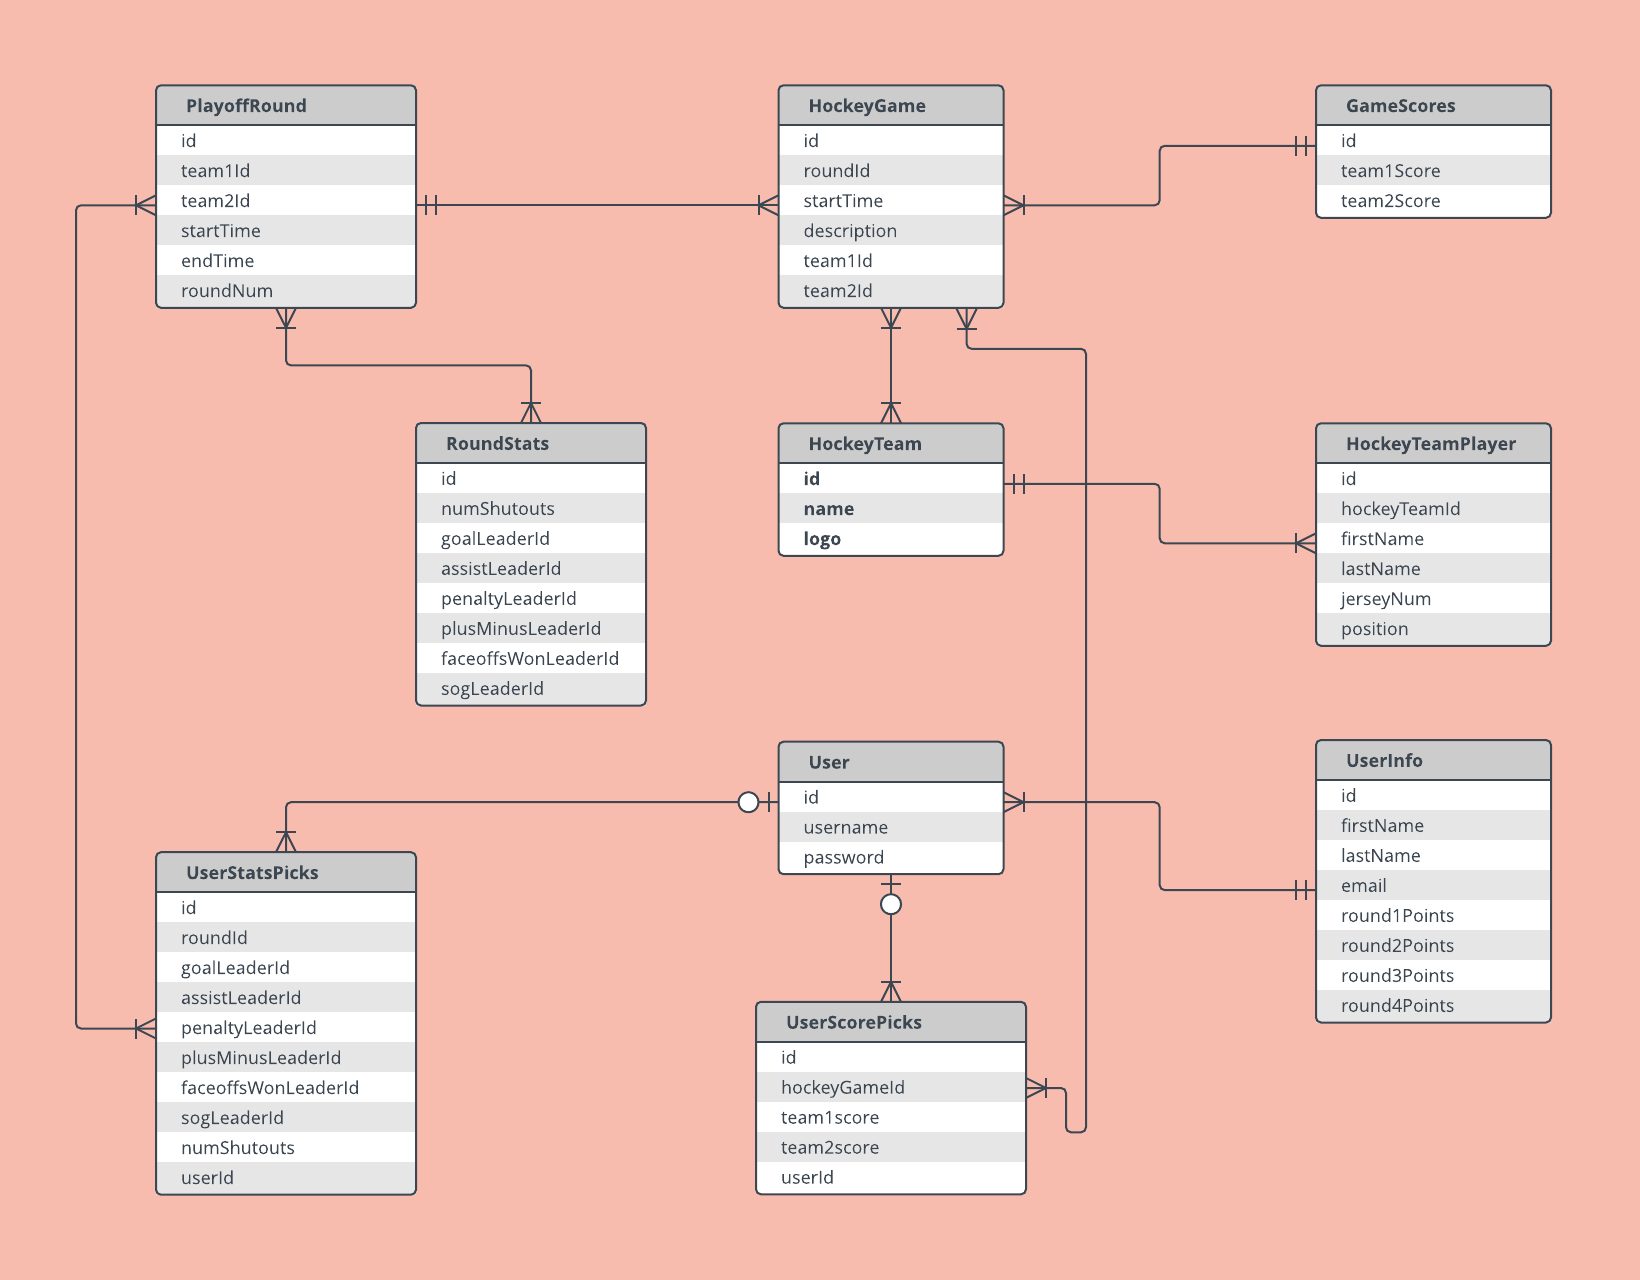 Er Diagram Examples And Templates | Lucidchart intended for How To Draw Er Diagram Examples